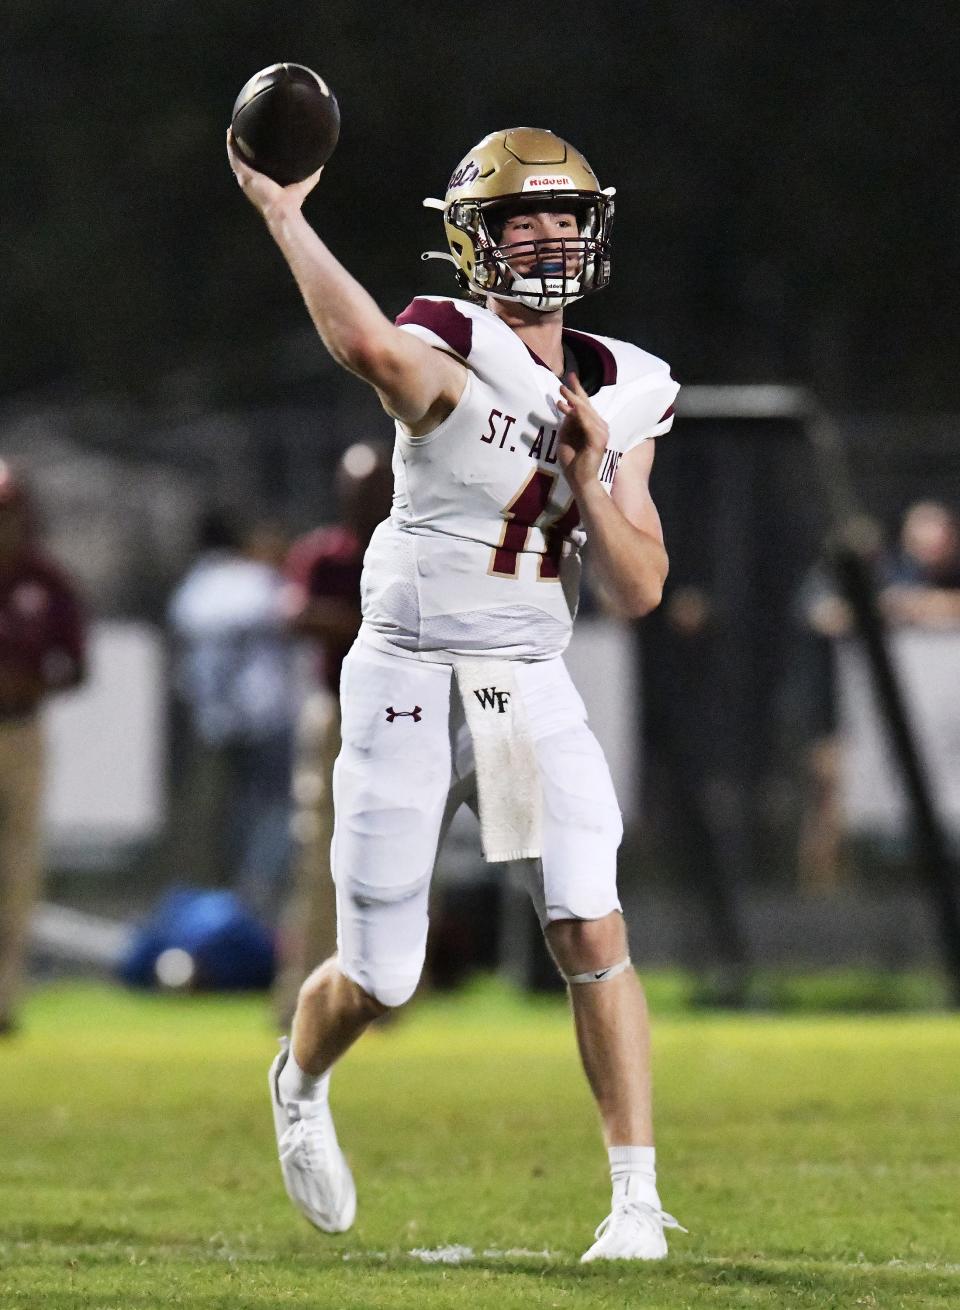 St. Augustine's quarterback Locklan Hewlett (11) targets a receiver during first quarter action against Nease.